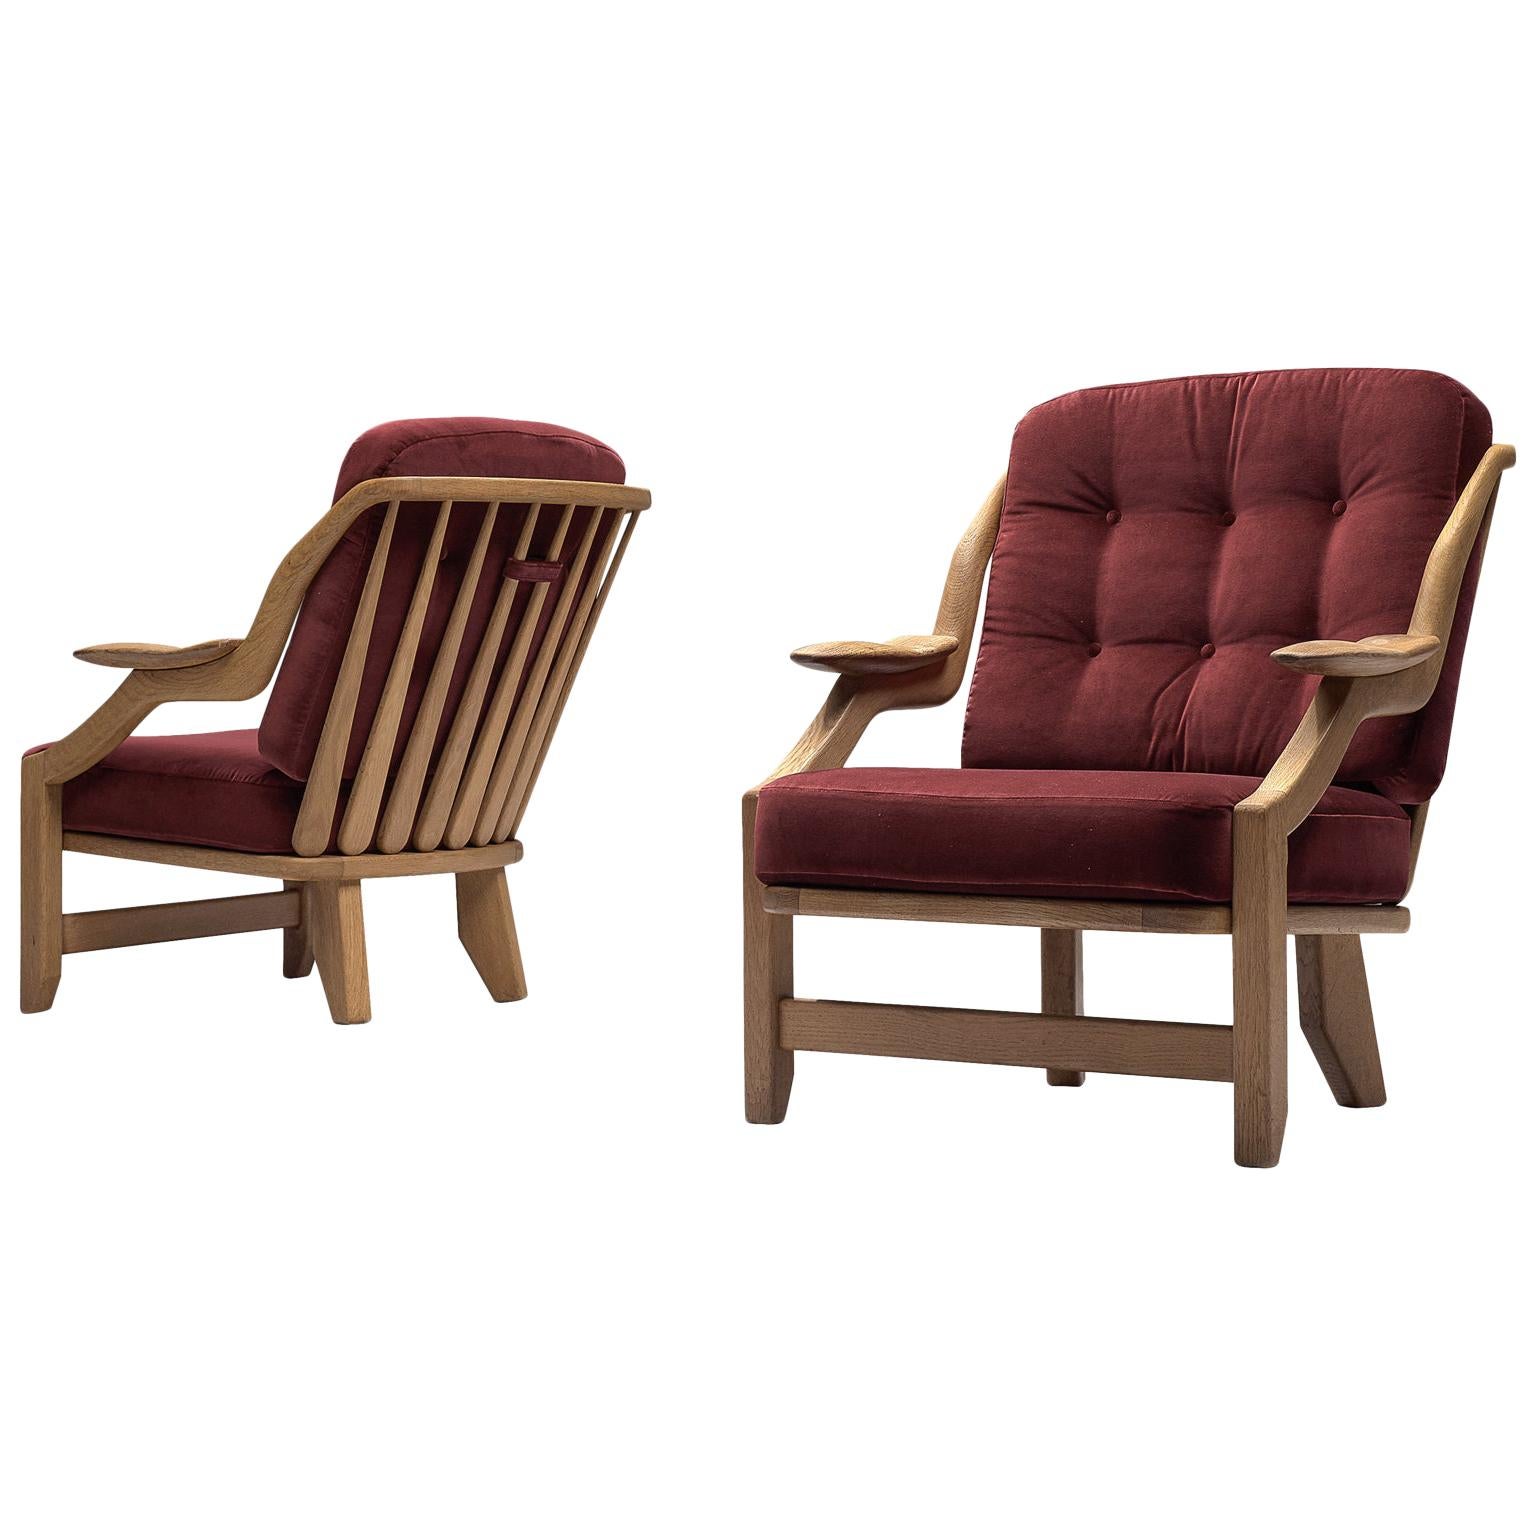 Pair of Burgundy Guillerme and Chambron Lounge Chairs